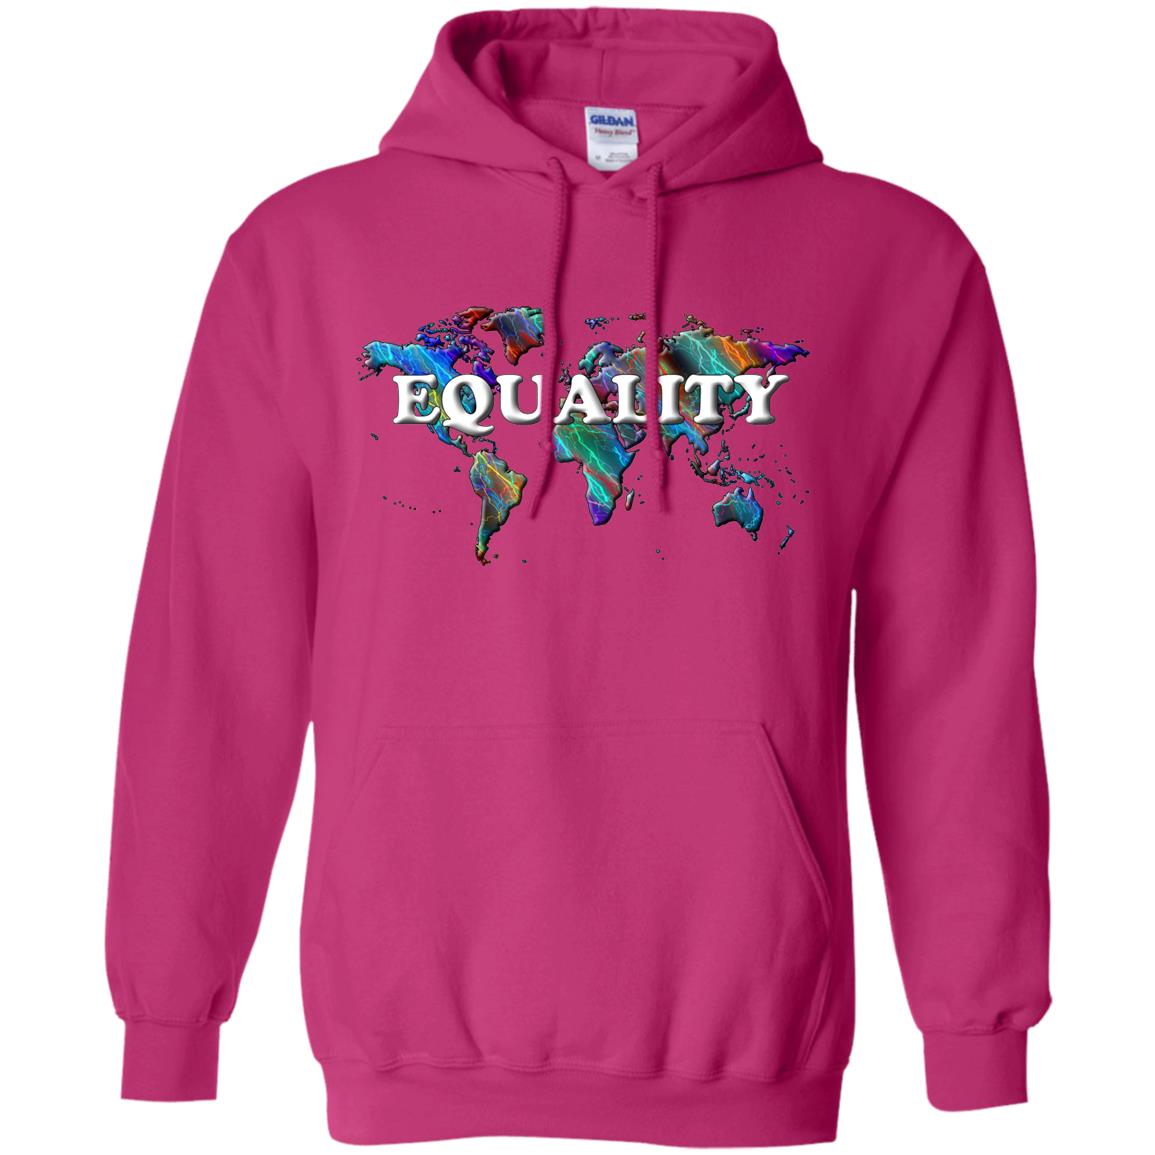 Equality Statement Hoodie